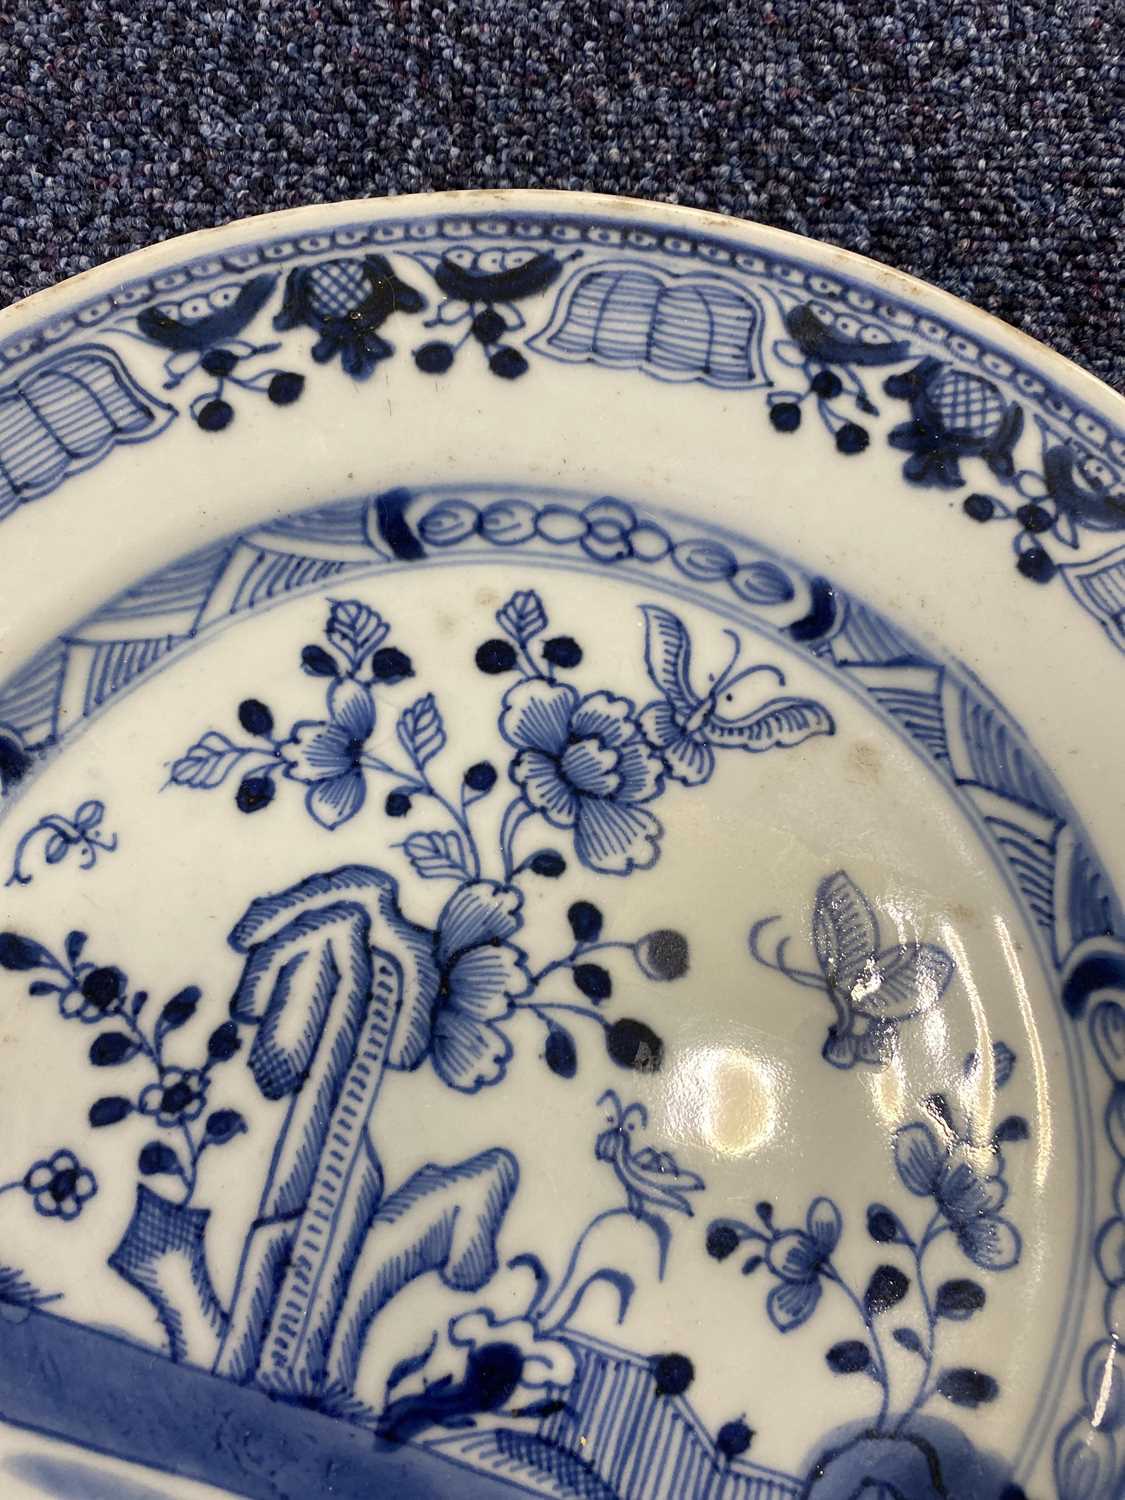 GROUP OF 18TH CENTURY CHINESE BLUE AND WHITE PLATES AND SAUCER, QIANLONG PERIOD 1736 - 1795 - Bild 21 aus 21